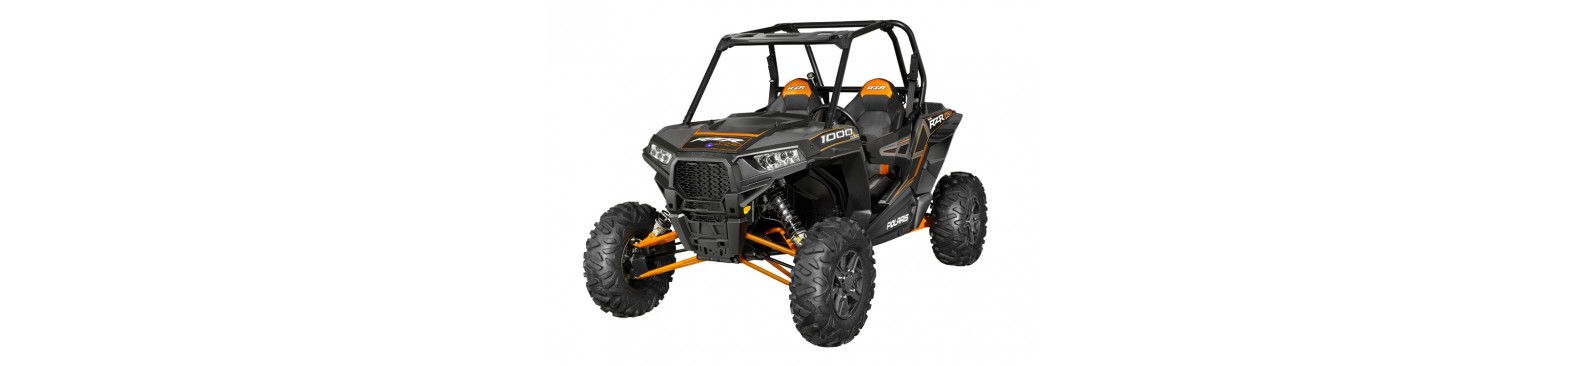 Performance and Aftermarket Upgrade parts for the Polaris RZR XP1000